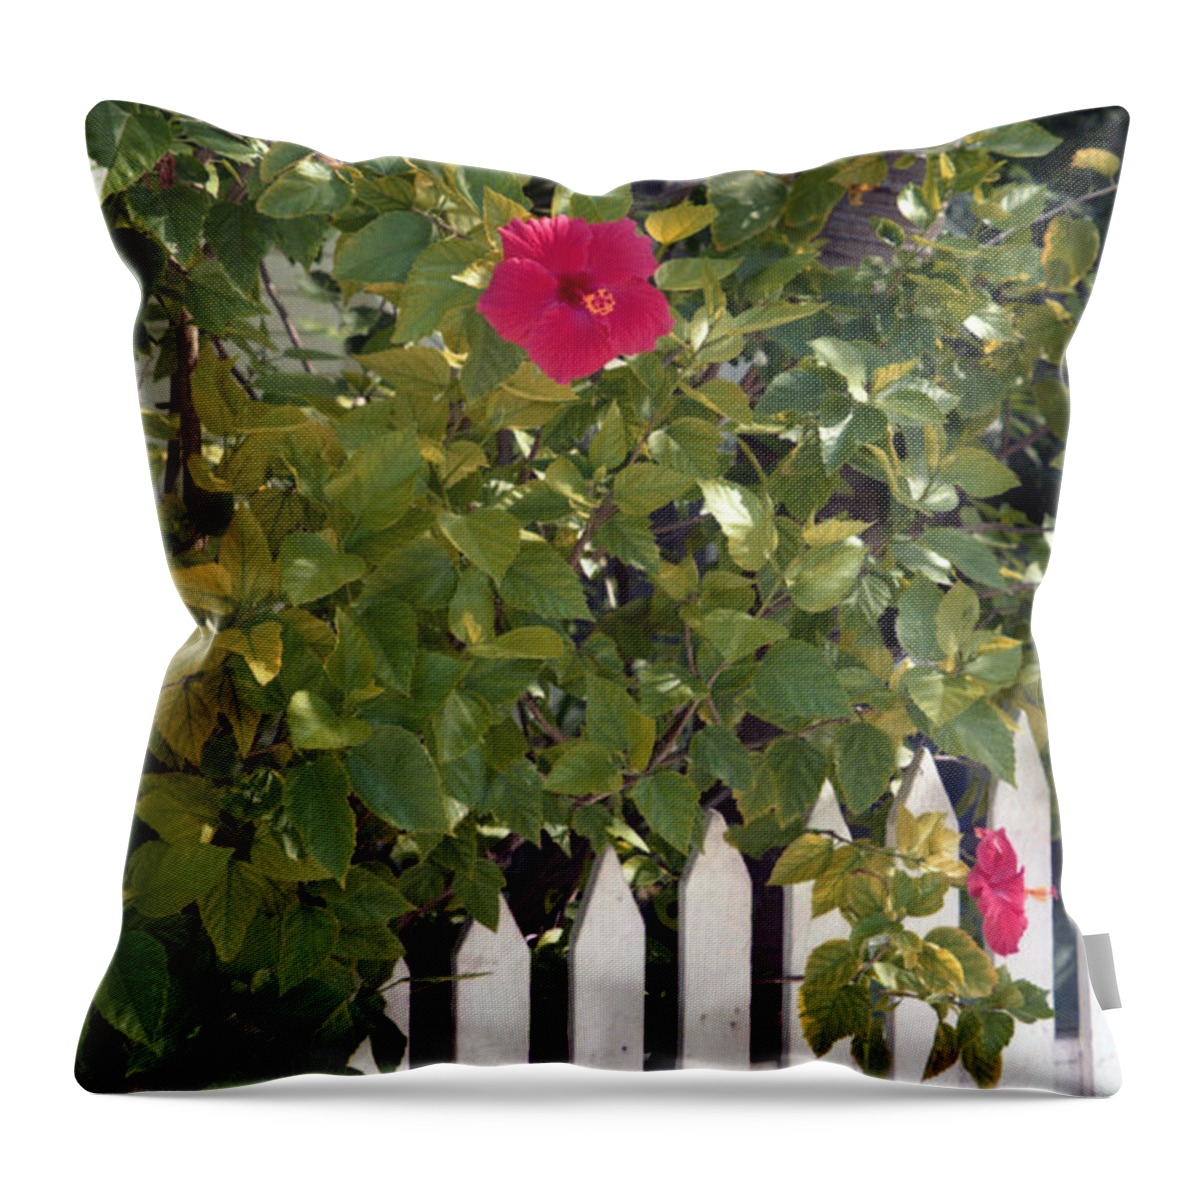 Azelea Throw Pillow featuring the photograph Along the Picket Fence by Richard Rizzo